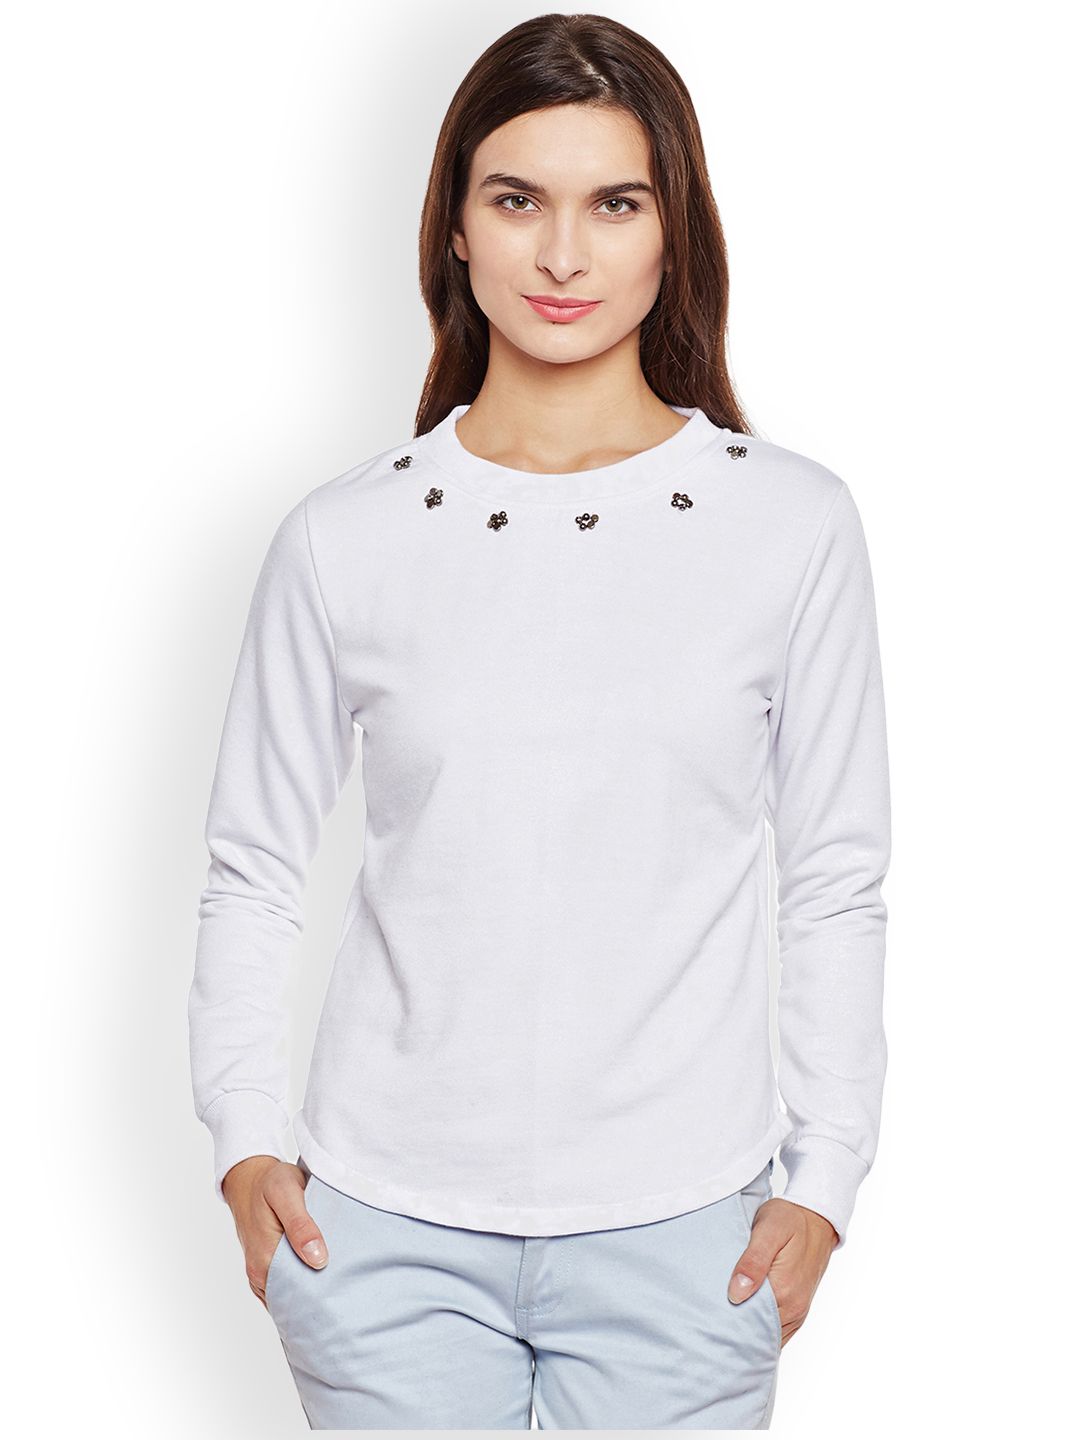 Belle Fille Women White Solid Sweatshirt Price in India